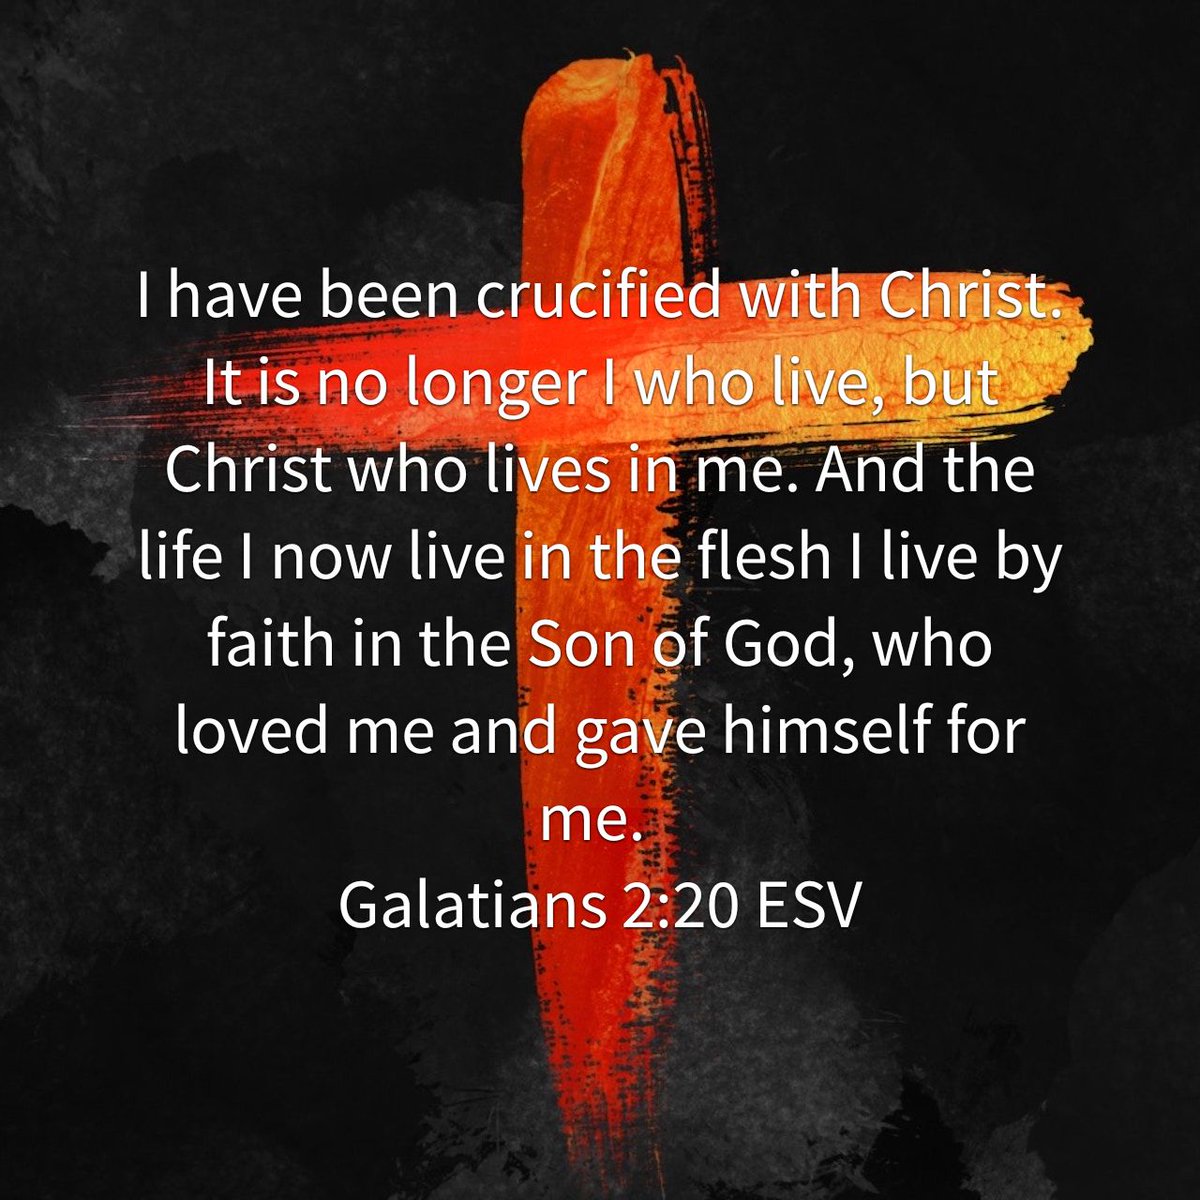 I have been crucified with Christ. It is no longer I who live, but Christ who lives in me.